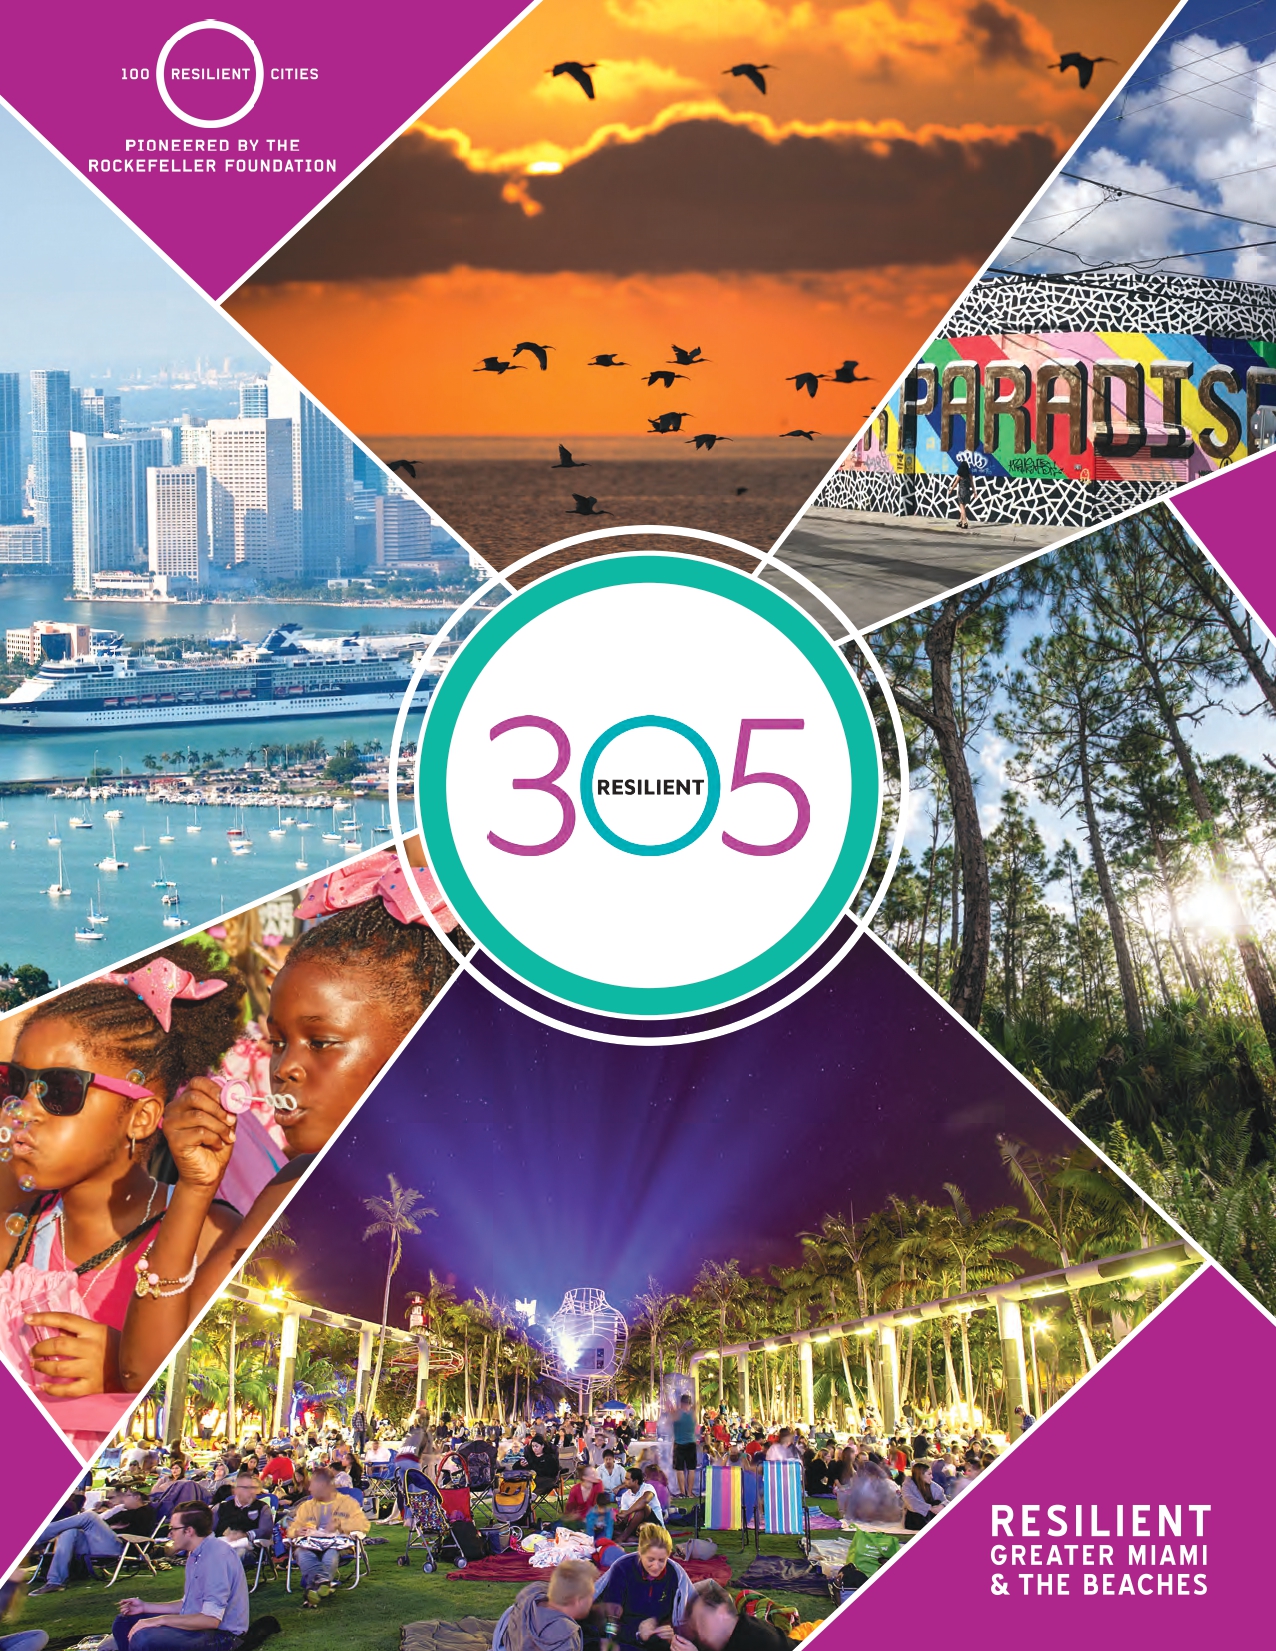 Resilient305 initiative 